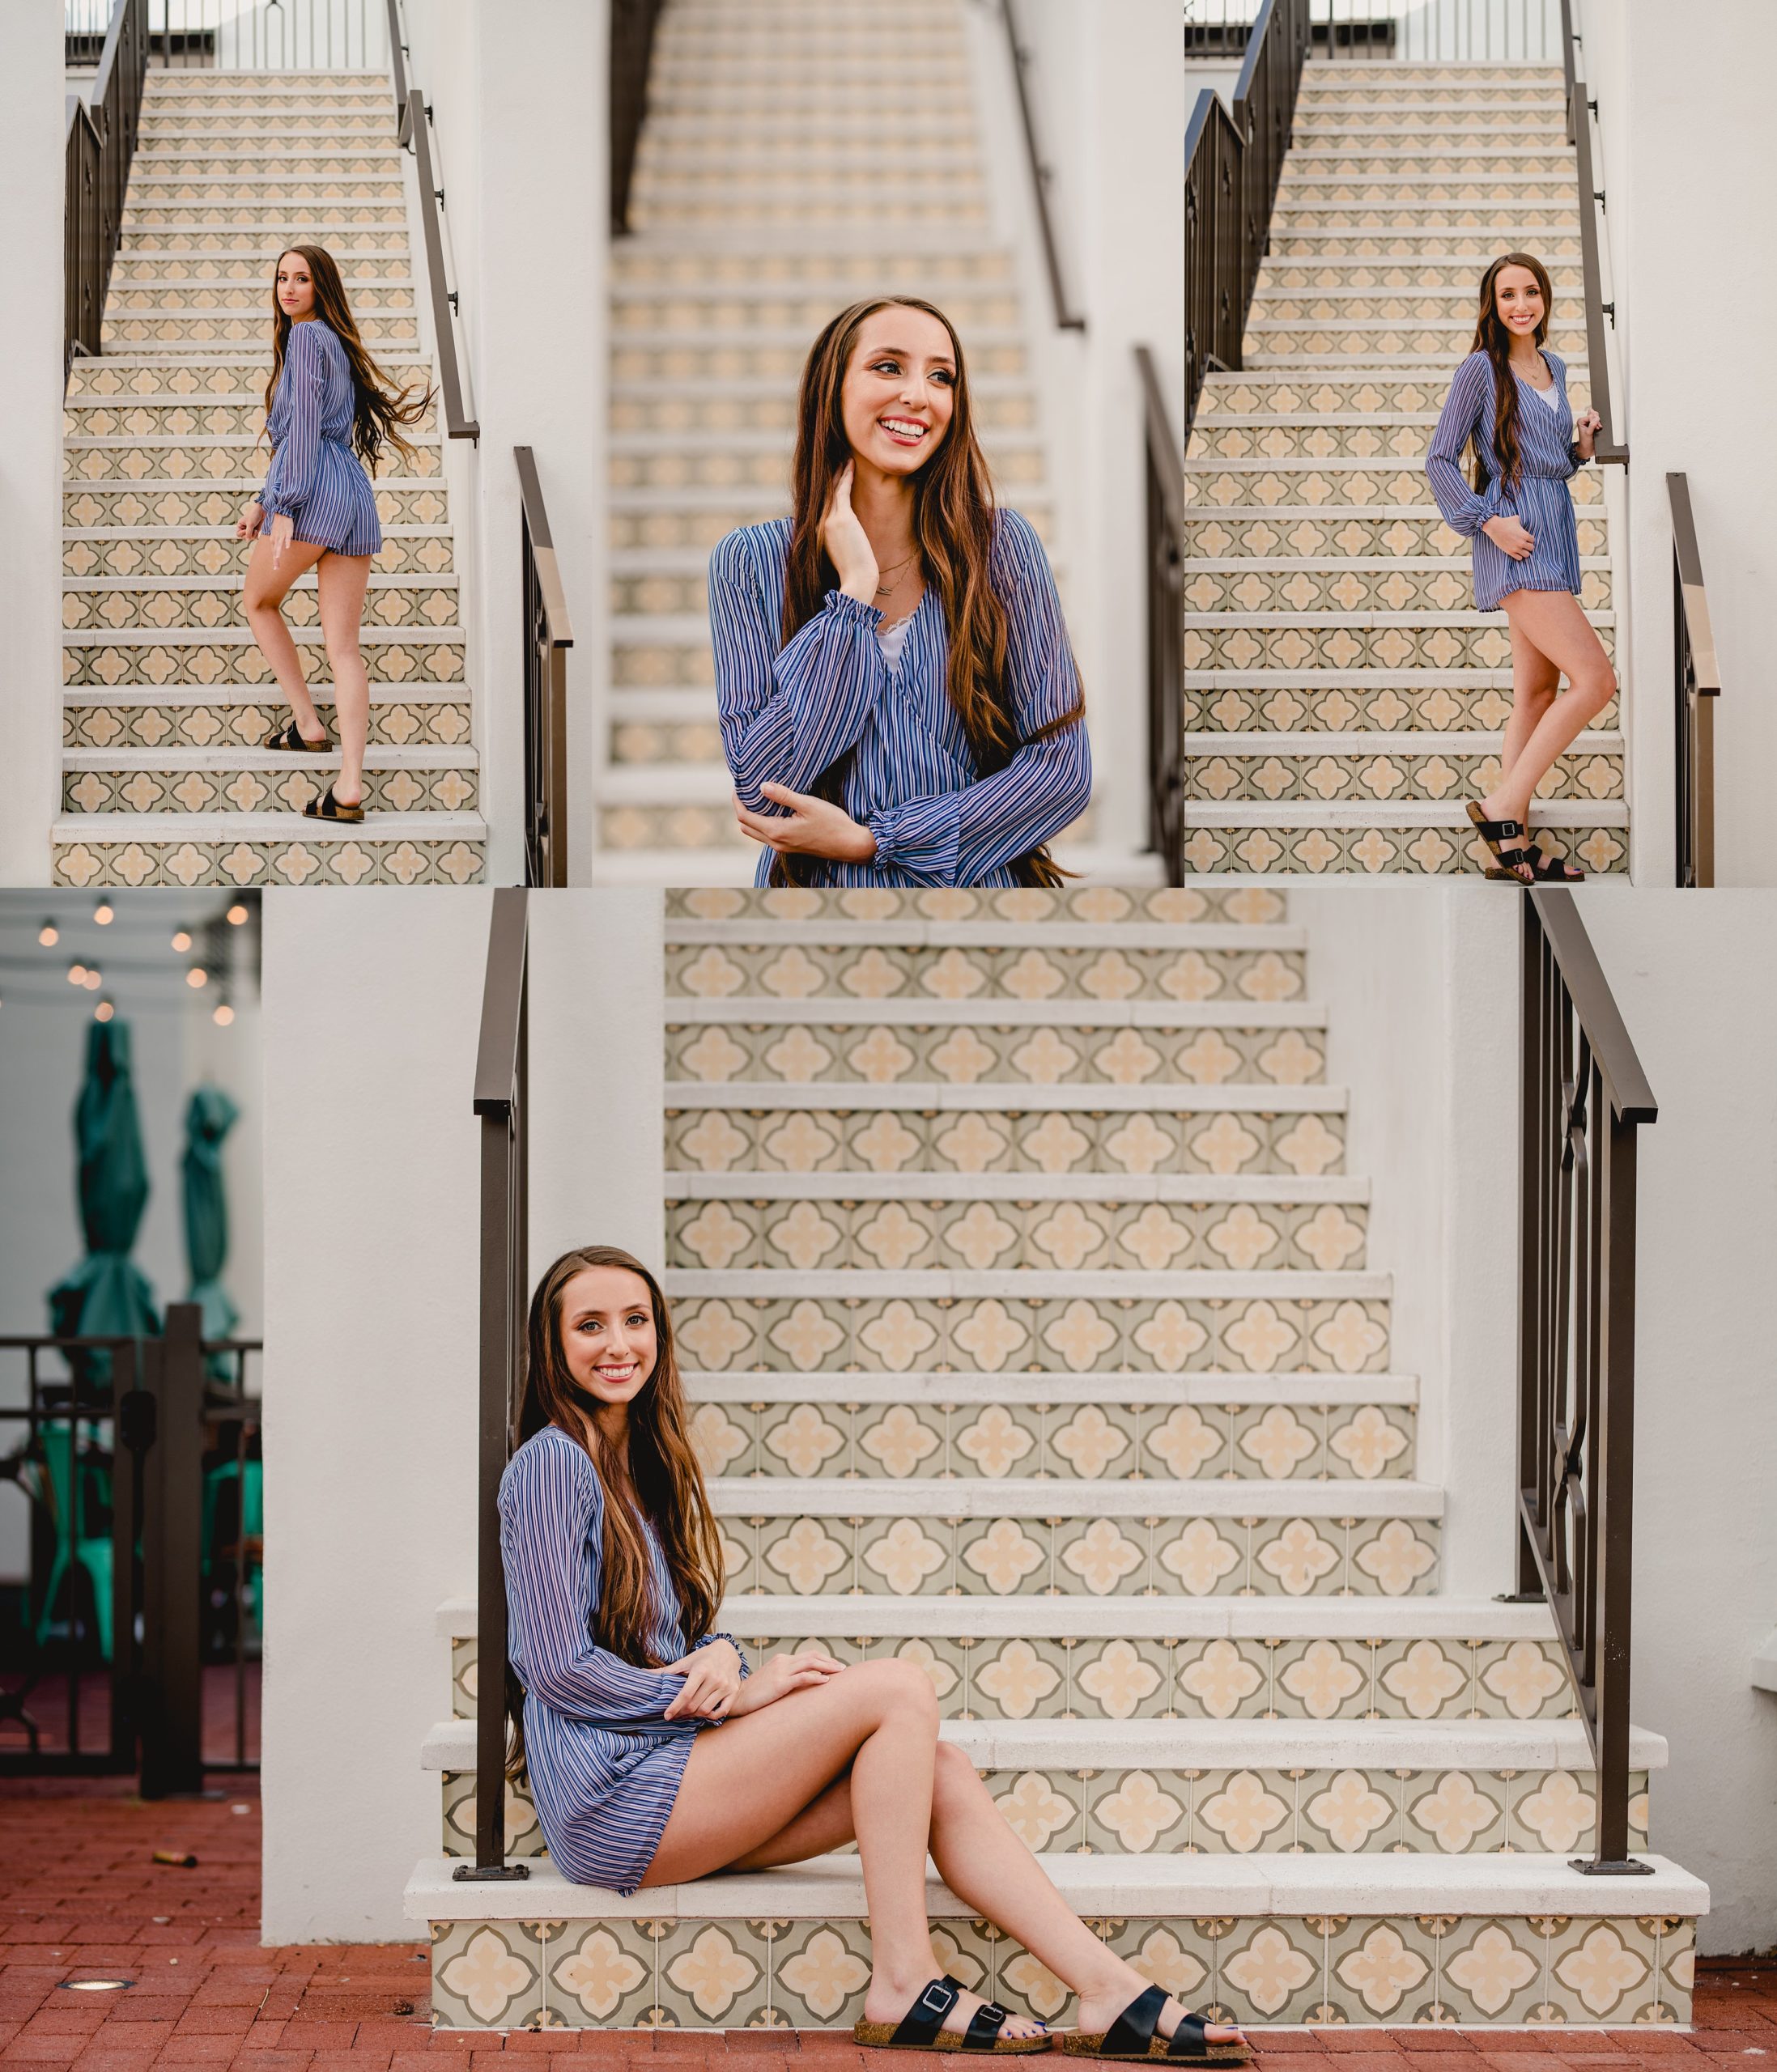 Unique staircase in Jacksonville beach by professional photographer